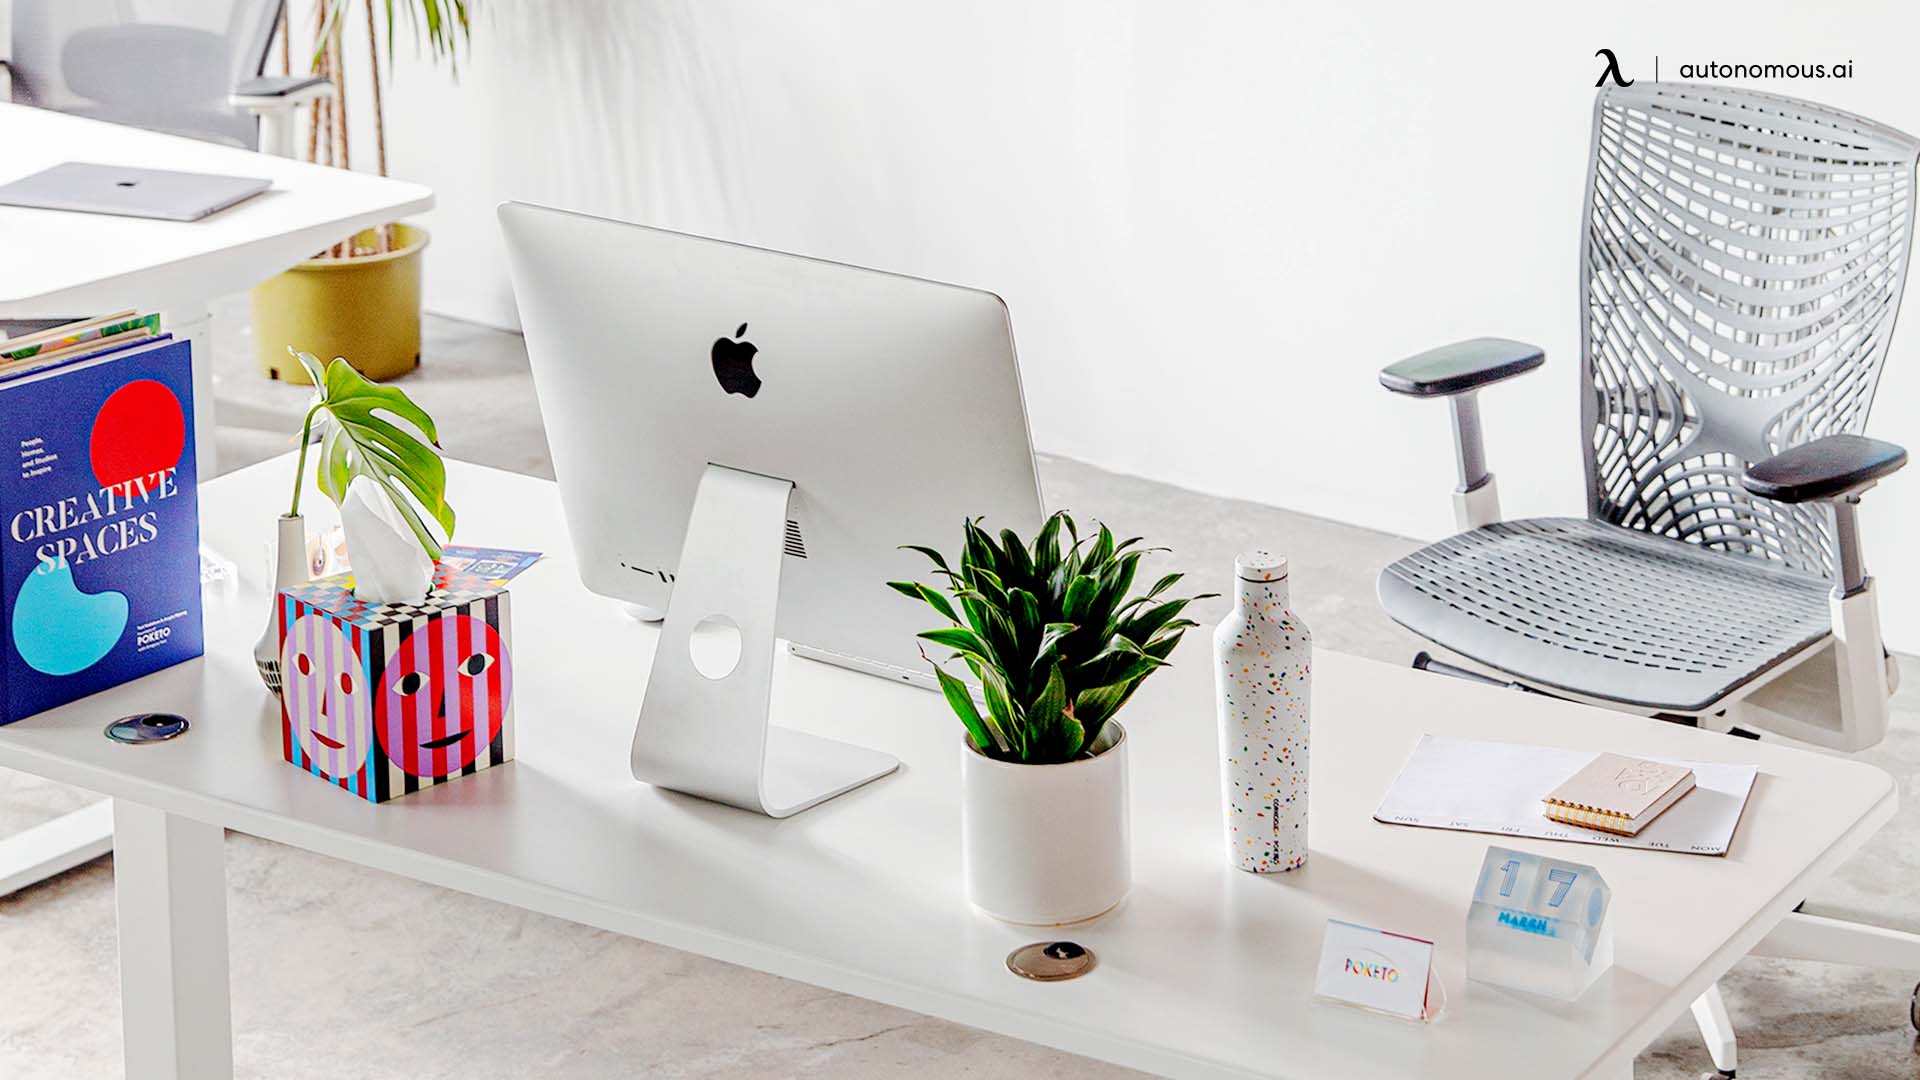 4 Office Ergonomic Tips to Beat Workplace Fatigue